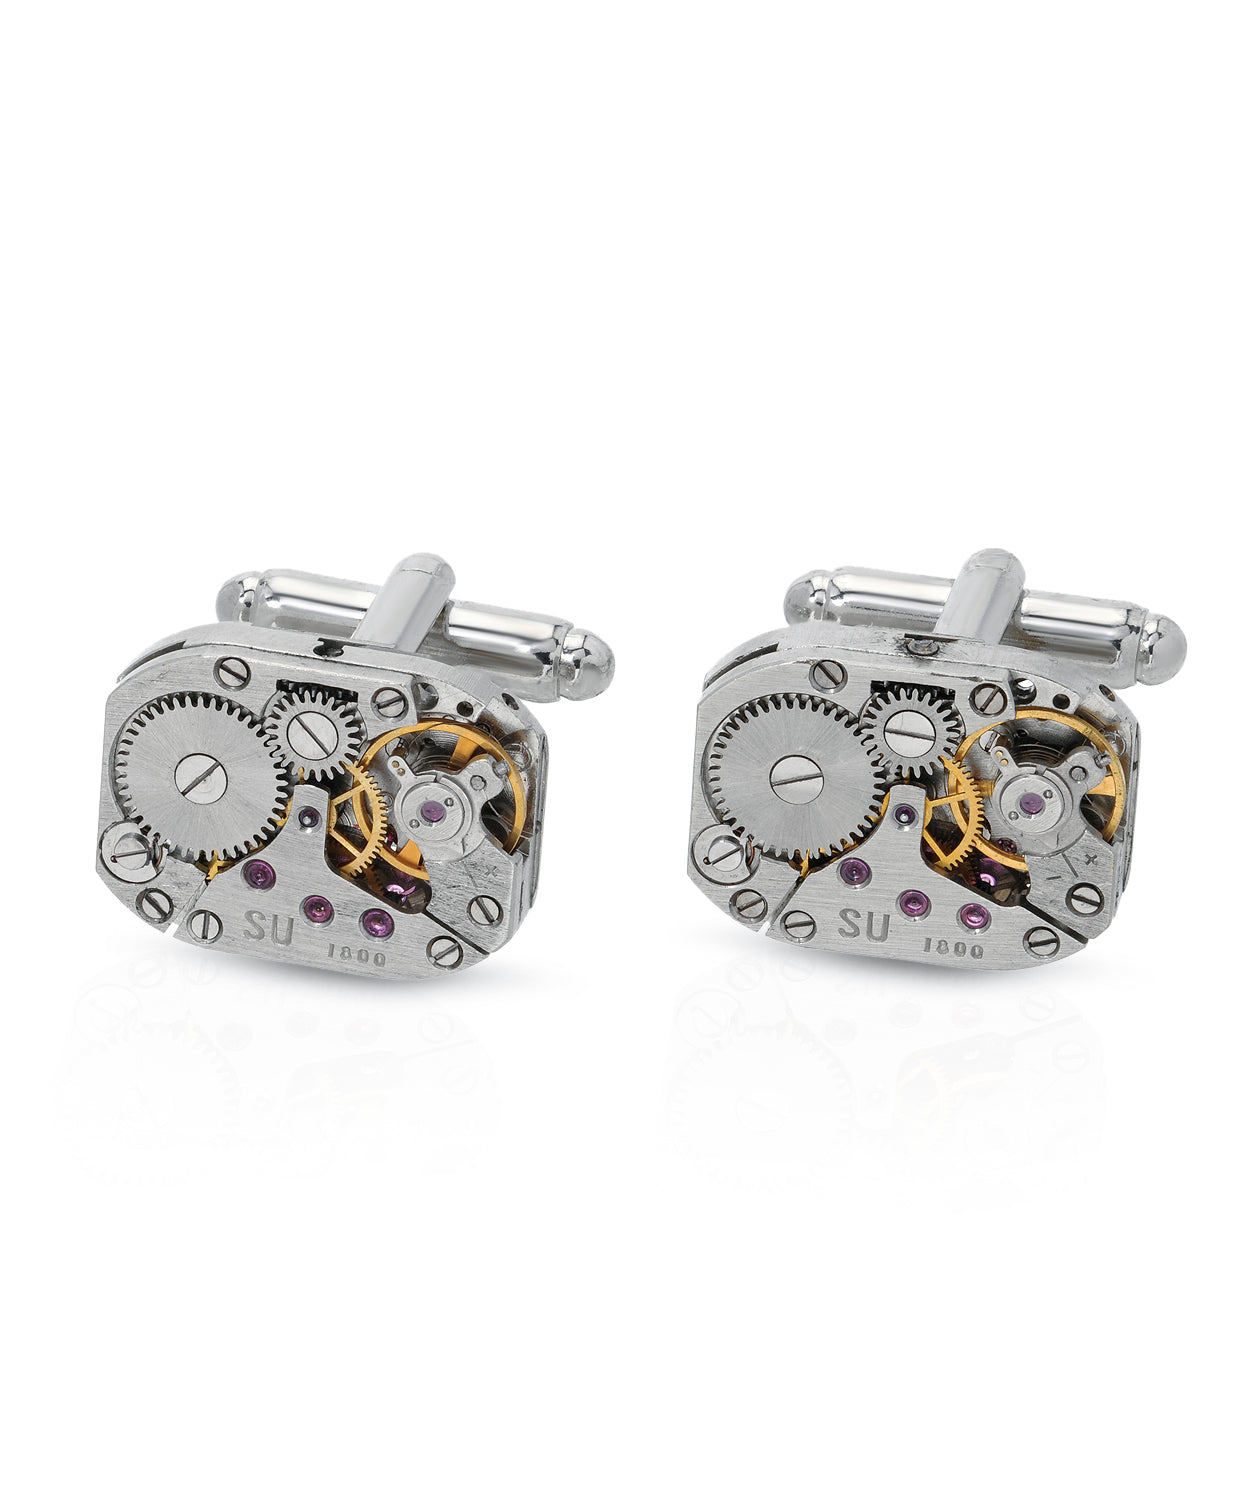 Cuff n' Style Timeless Collection Cuff Links Made with Real Watch Movement View 1